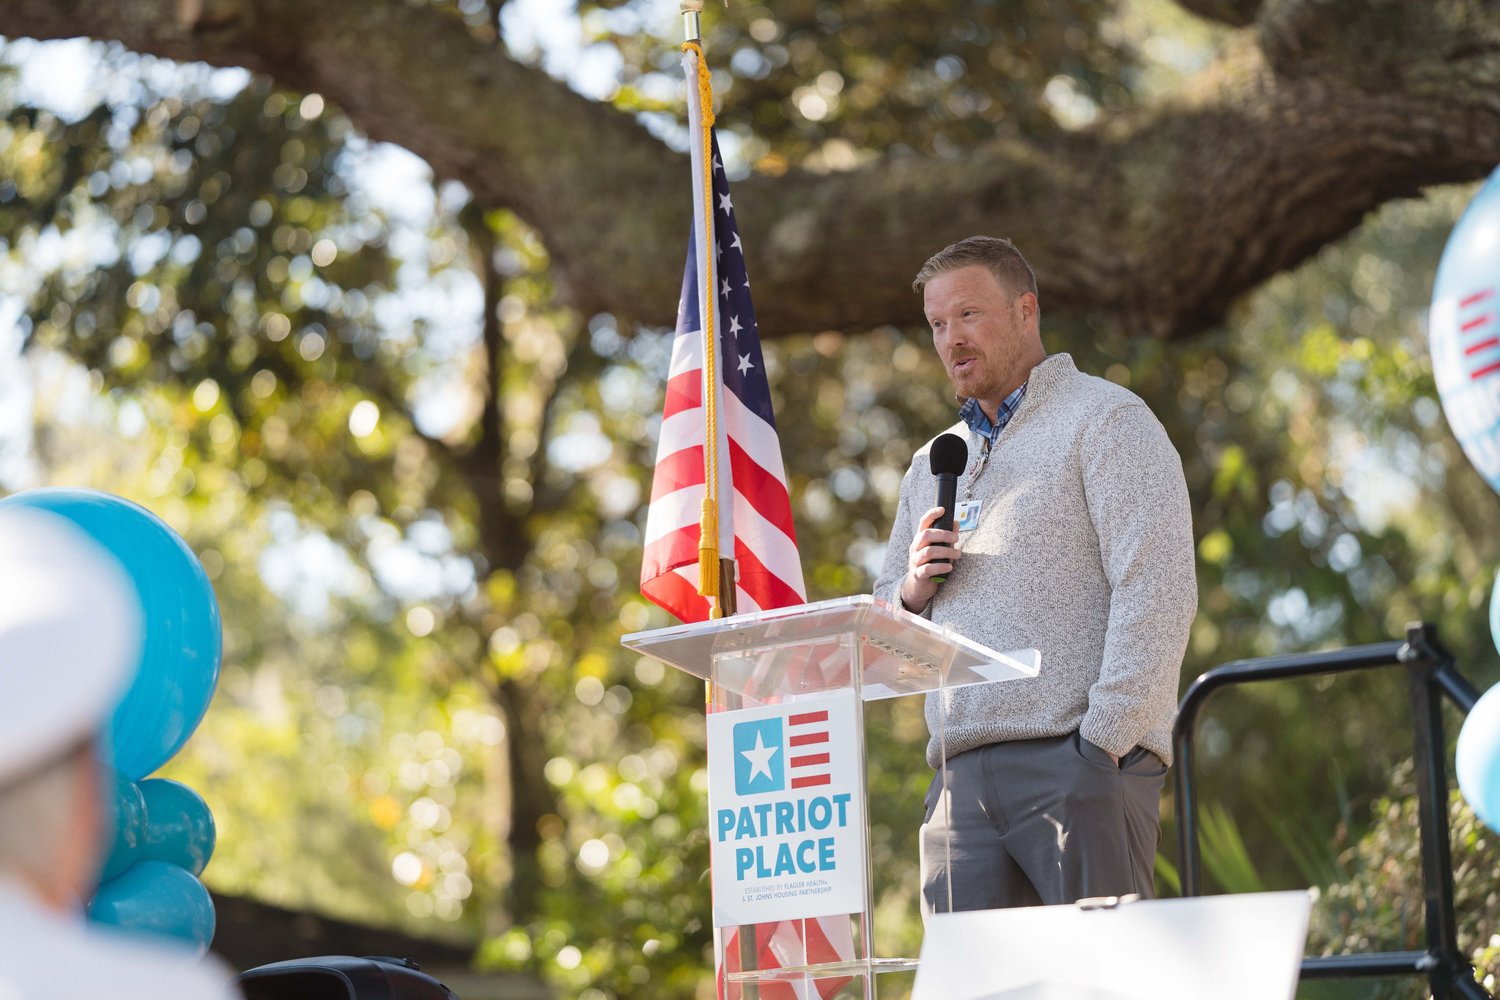 Michael Arnold, a veteran of the U.S. Army and employee of Flagler Health+, speaks at the Nov. 16 flag-raising at Patriot Place.